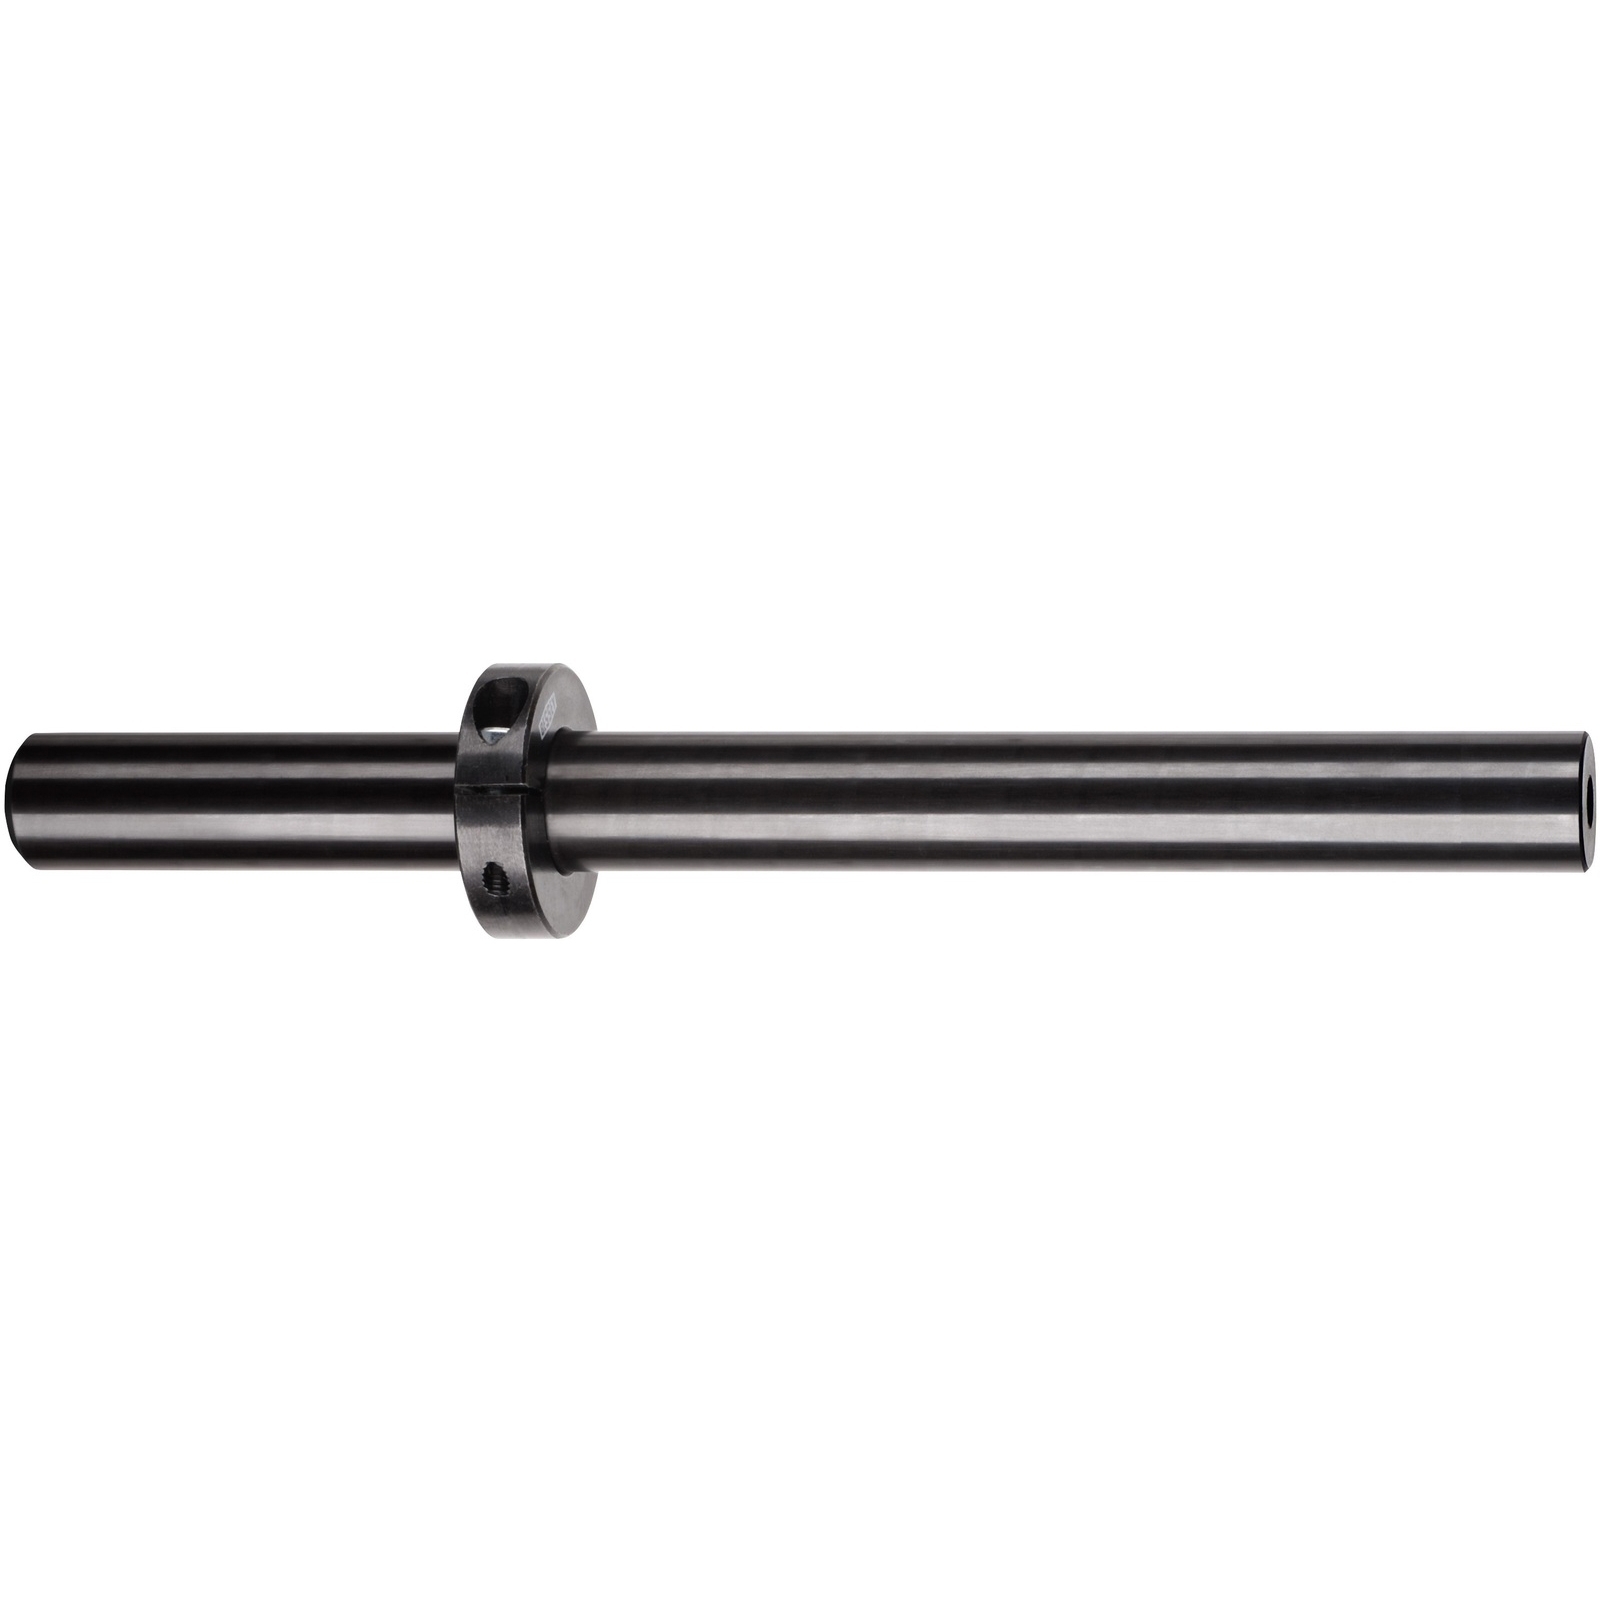 Bessey 15 - 200 mm Hold Down Clamping Element Accessory - Extension Attachment TW16X